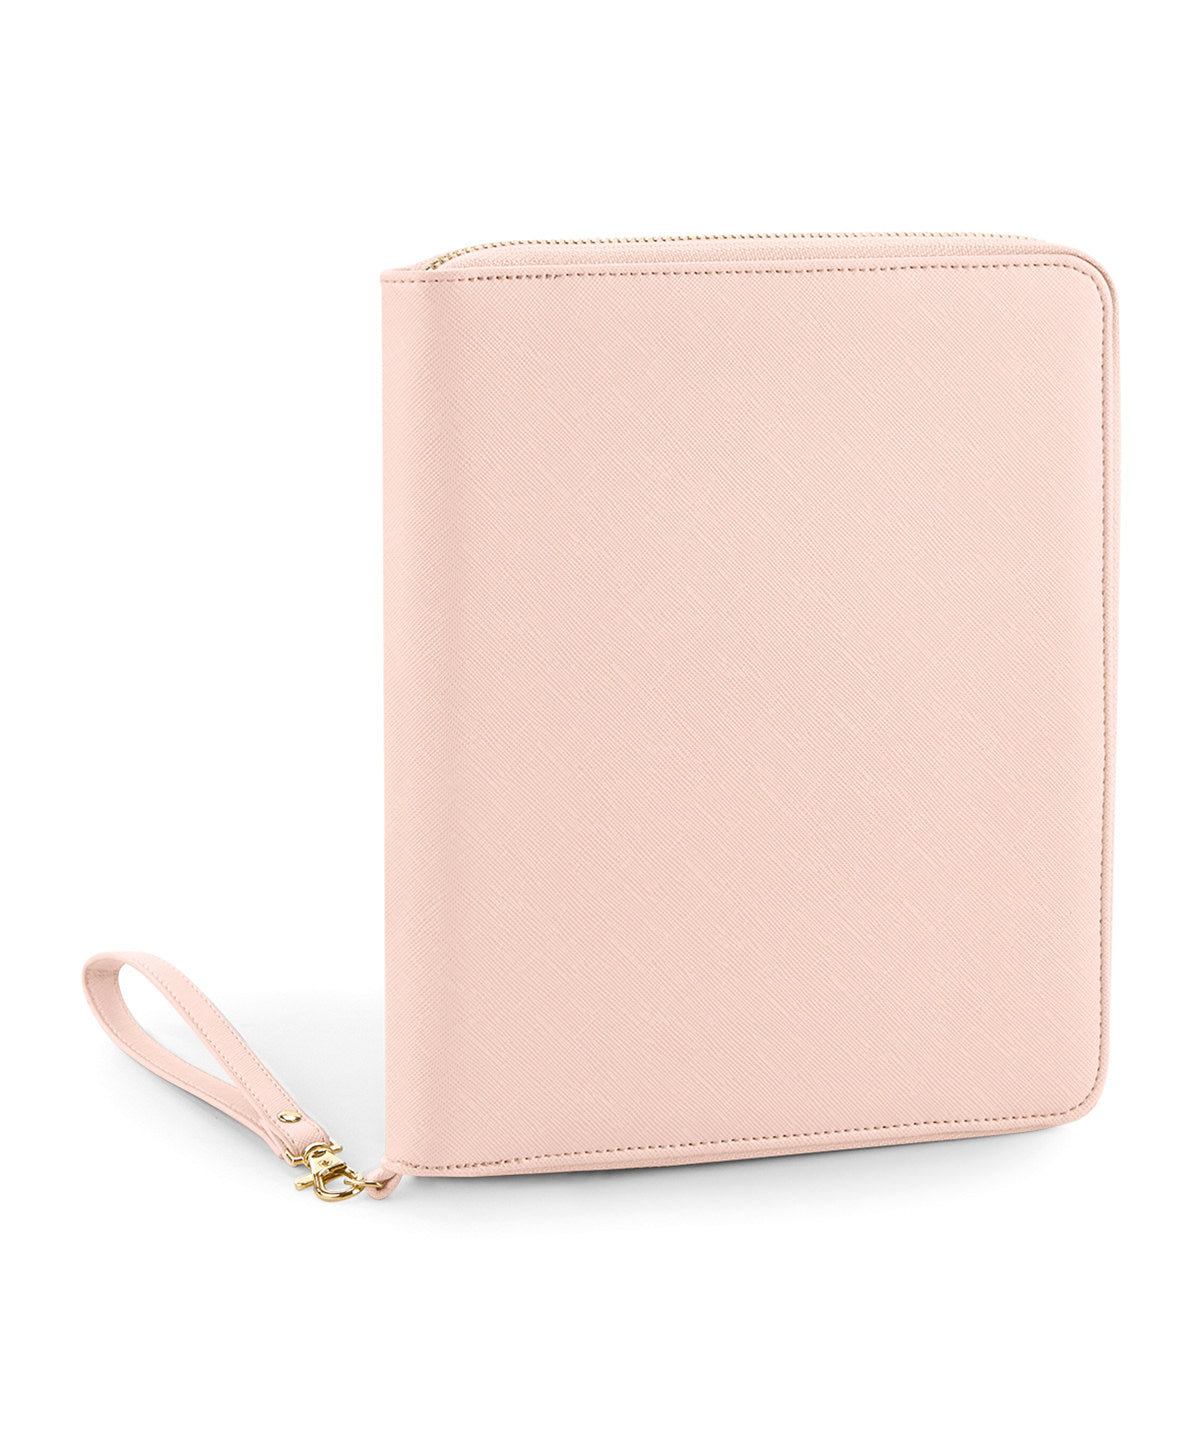 Personalised Bags - Light Pink Bagbase Boutique travel/tech organiser